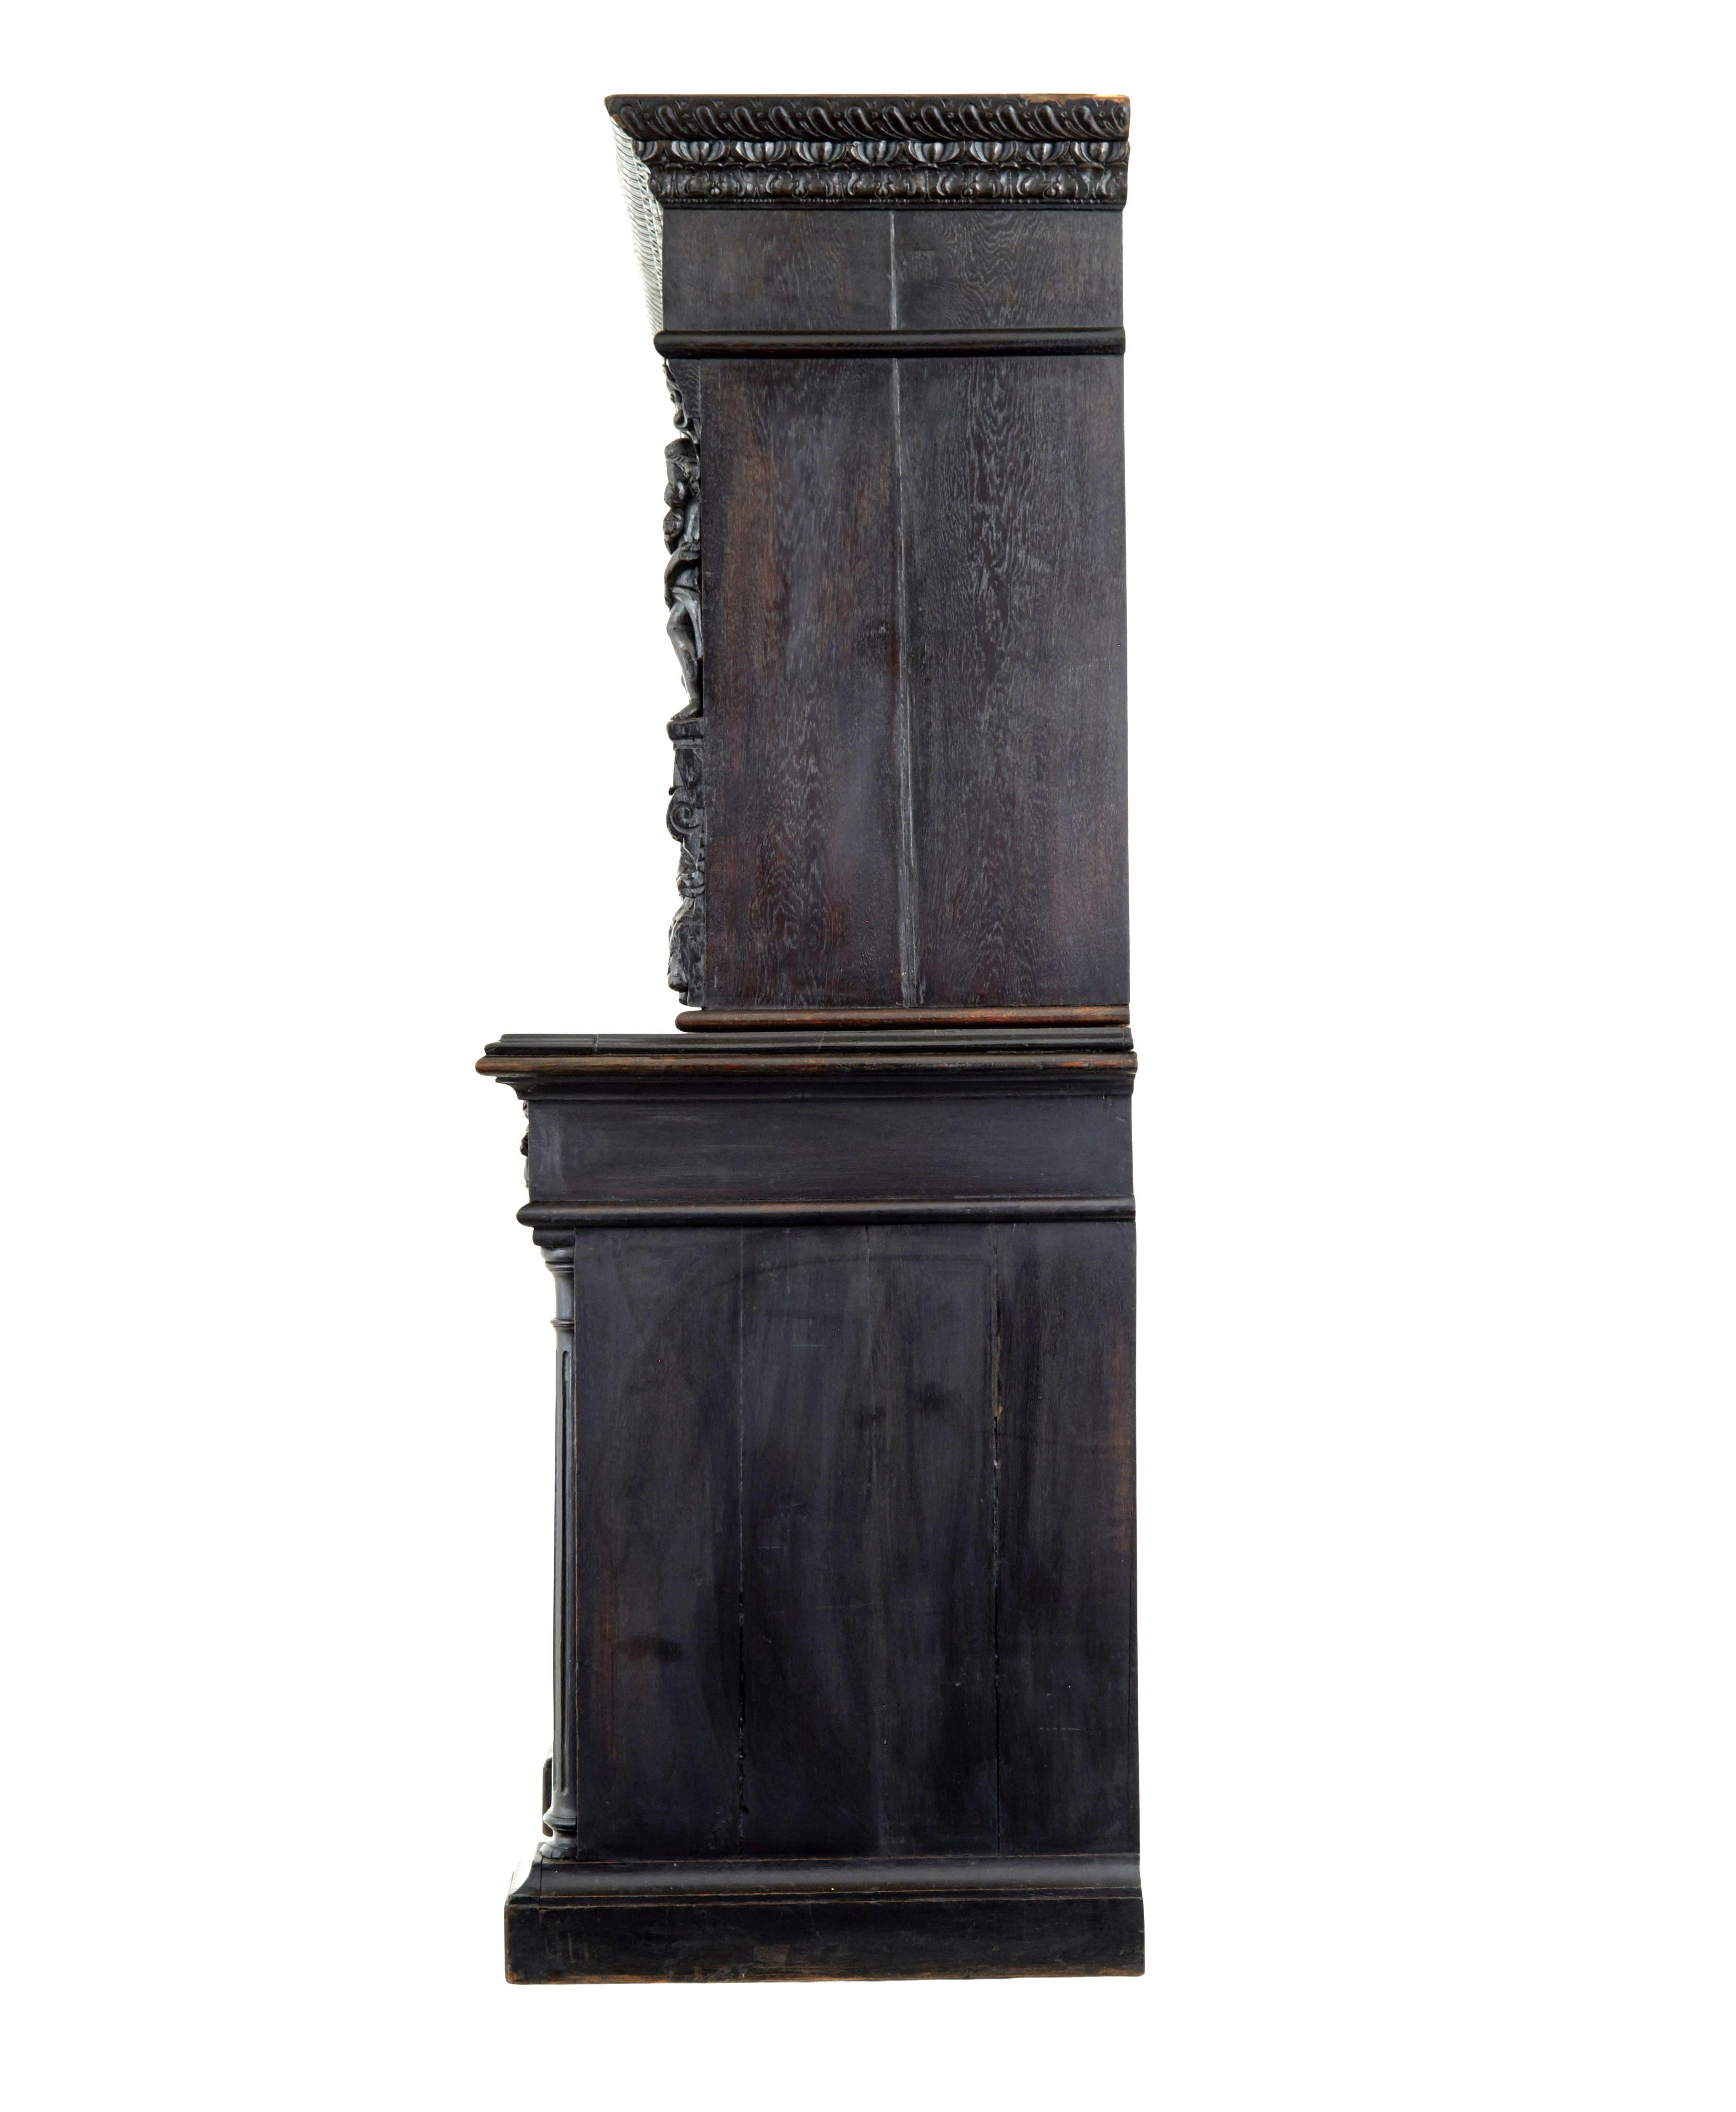 Large 19th Century Flemish Carved Oak Cabinet In Good Condition For Sale In Debenham, Suffolk